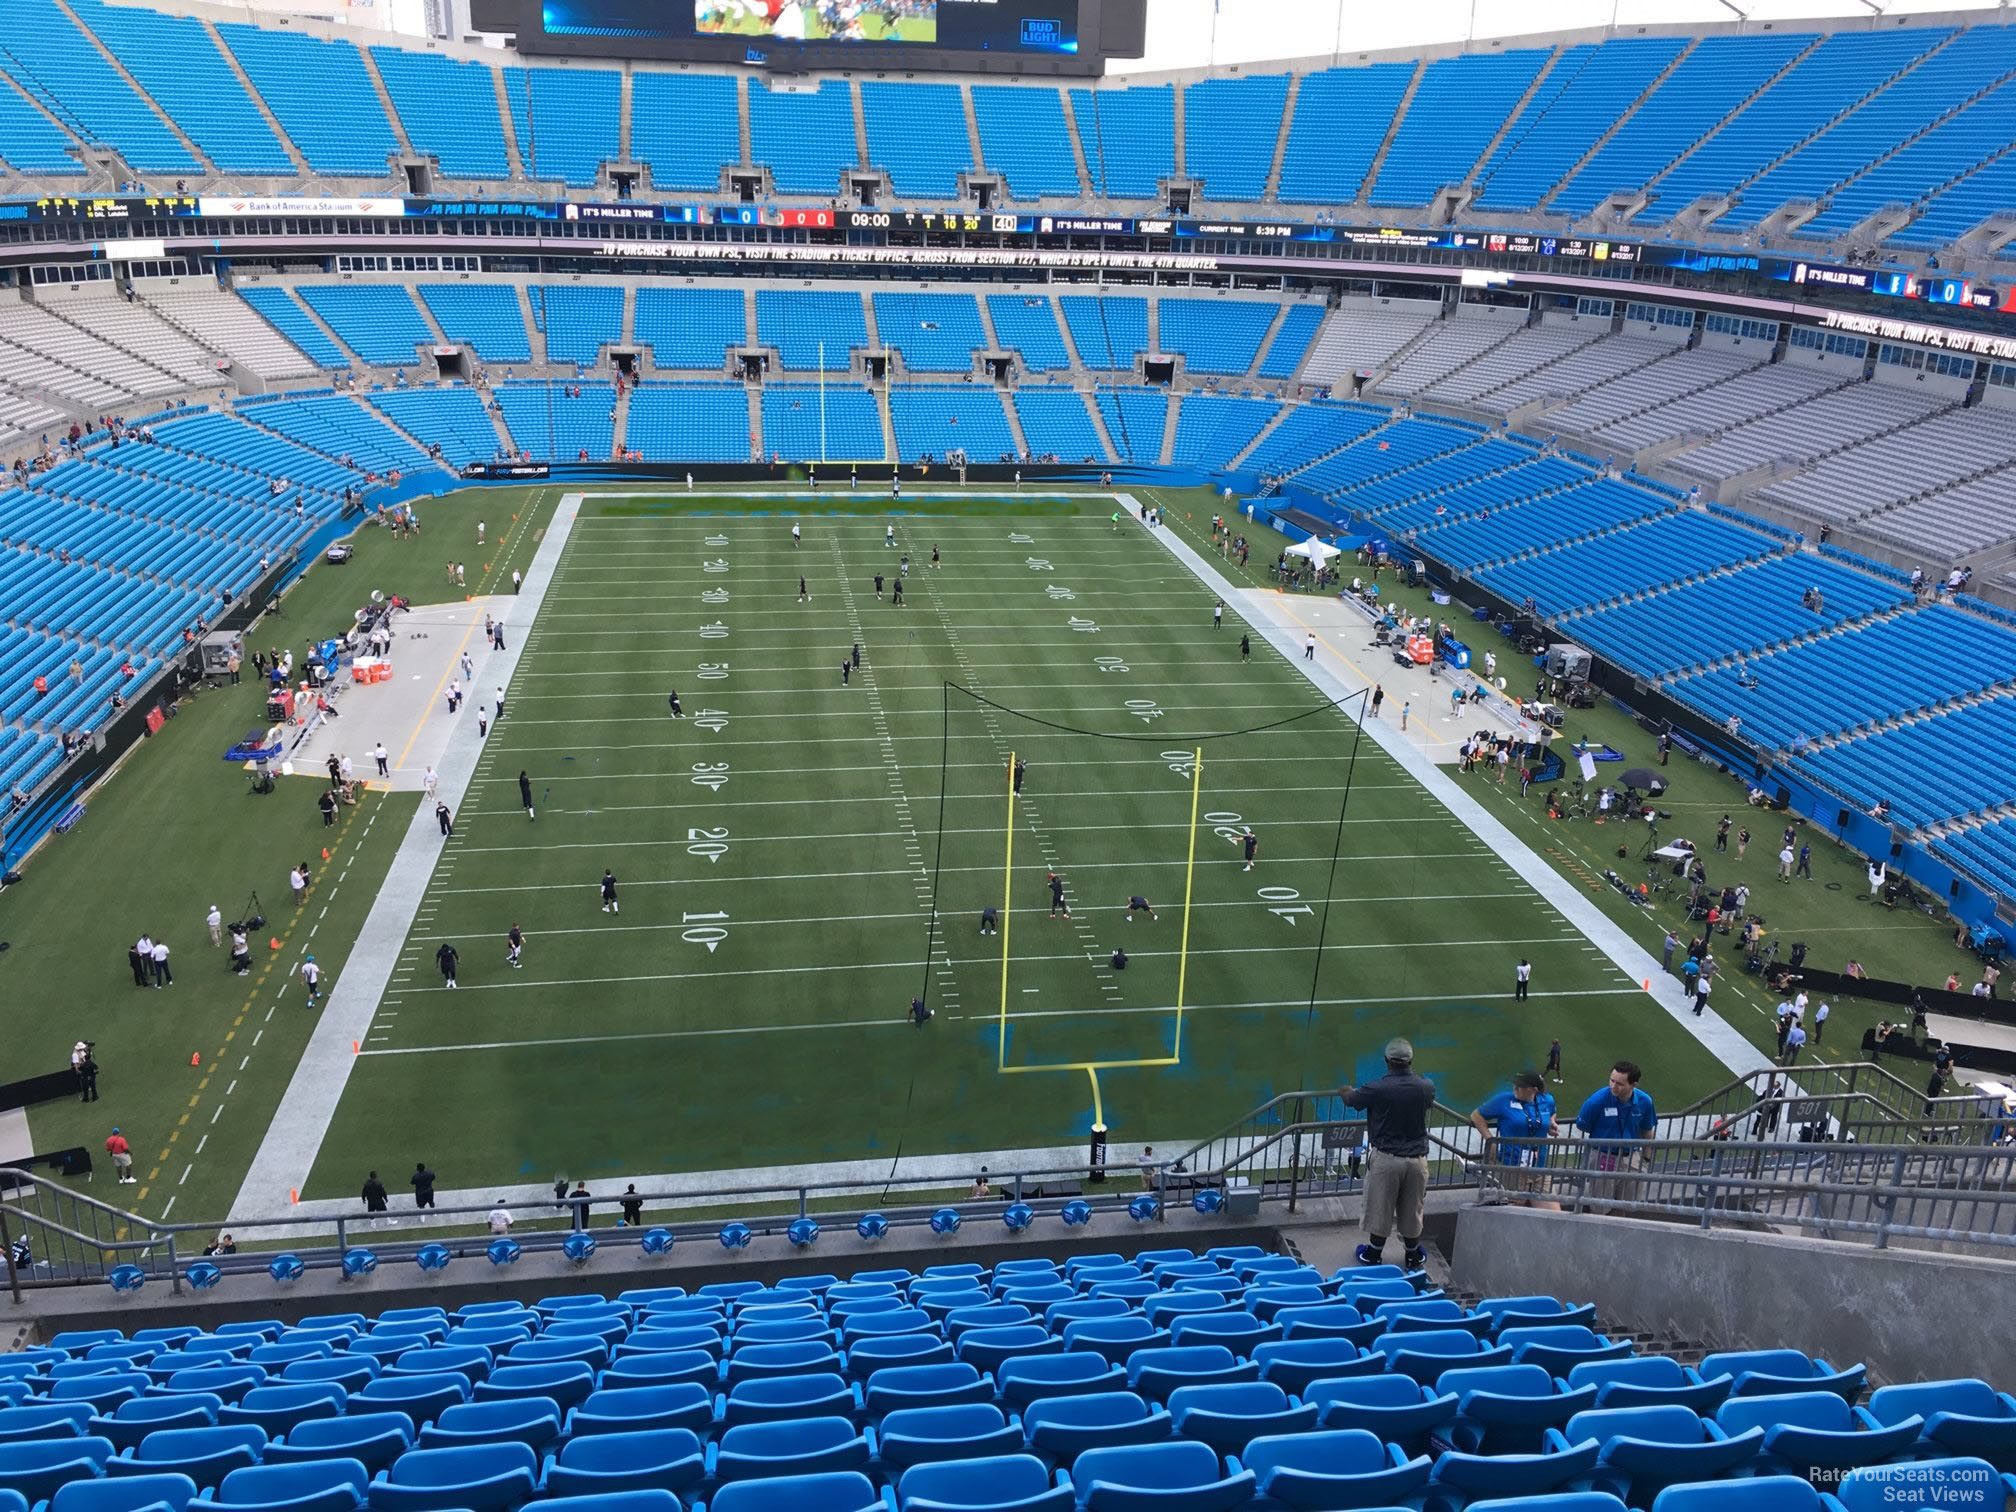 Section 502 at Bank of America Stadium 